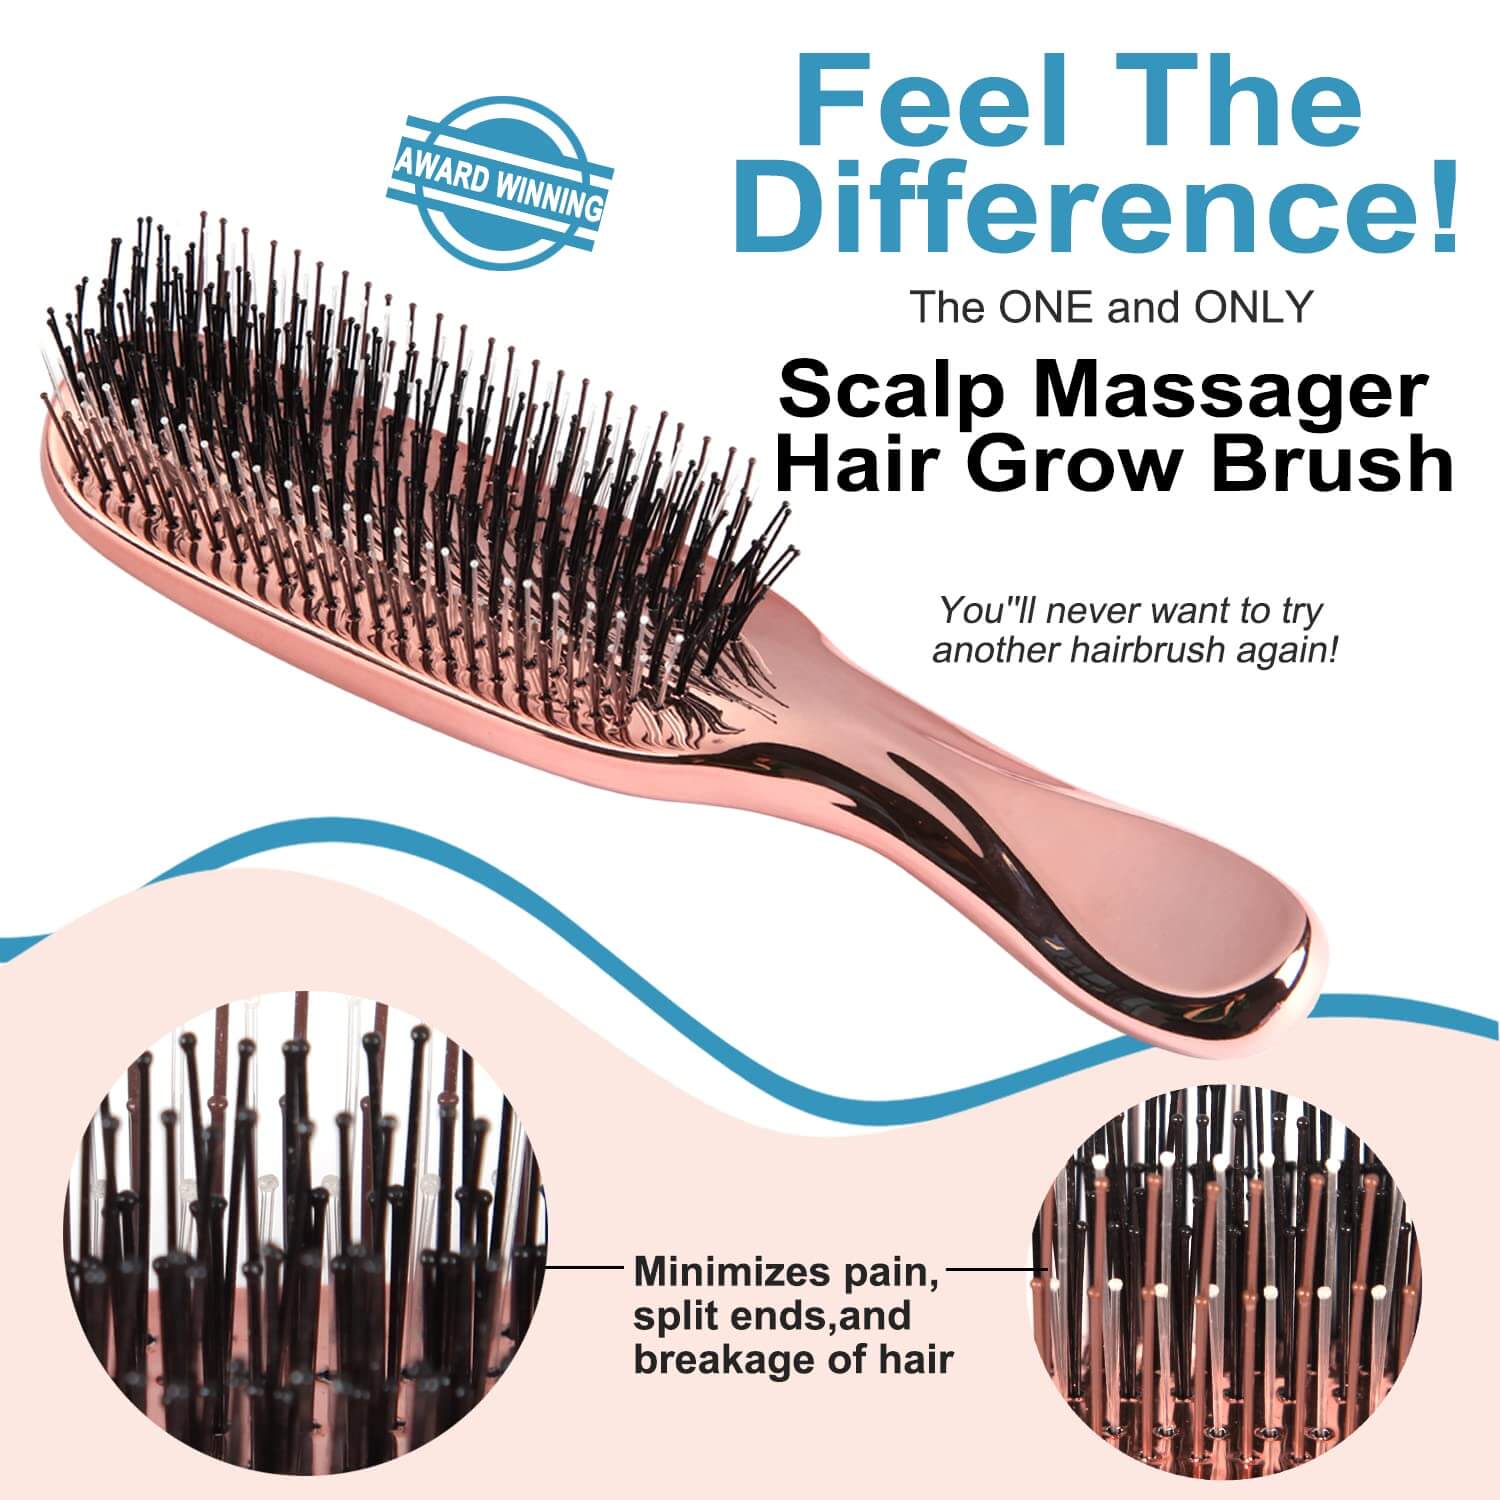 The Scalp Massage Brush and two graphics stating that the bristles minimize pain, split ends and breakage of hair.